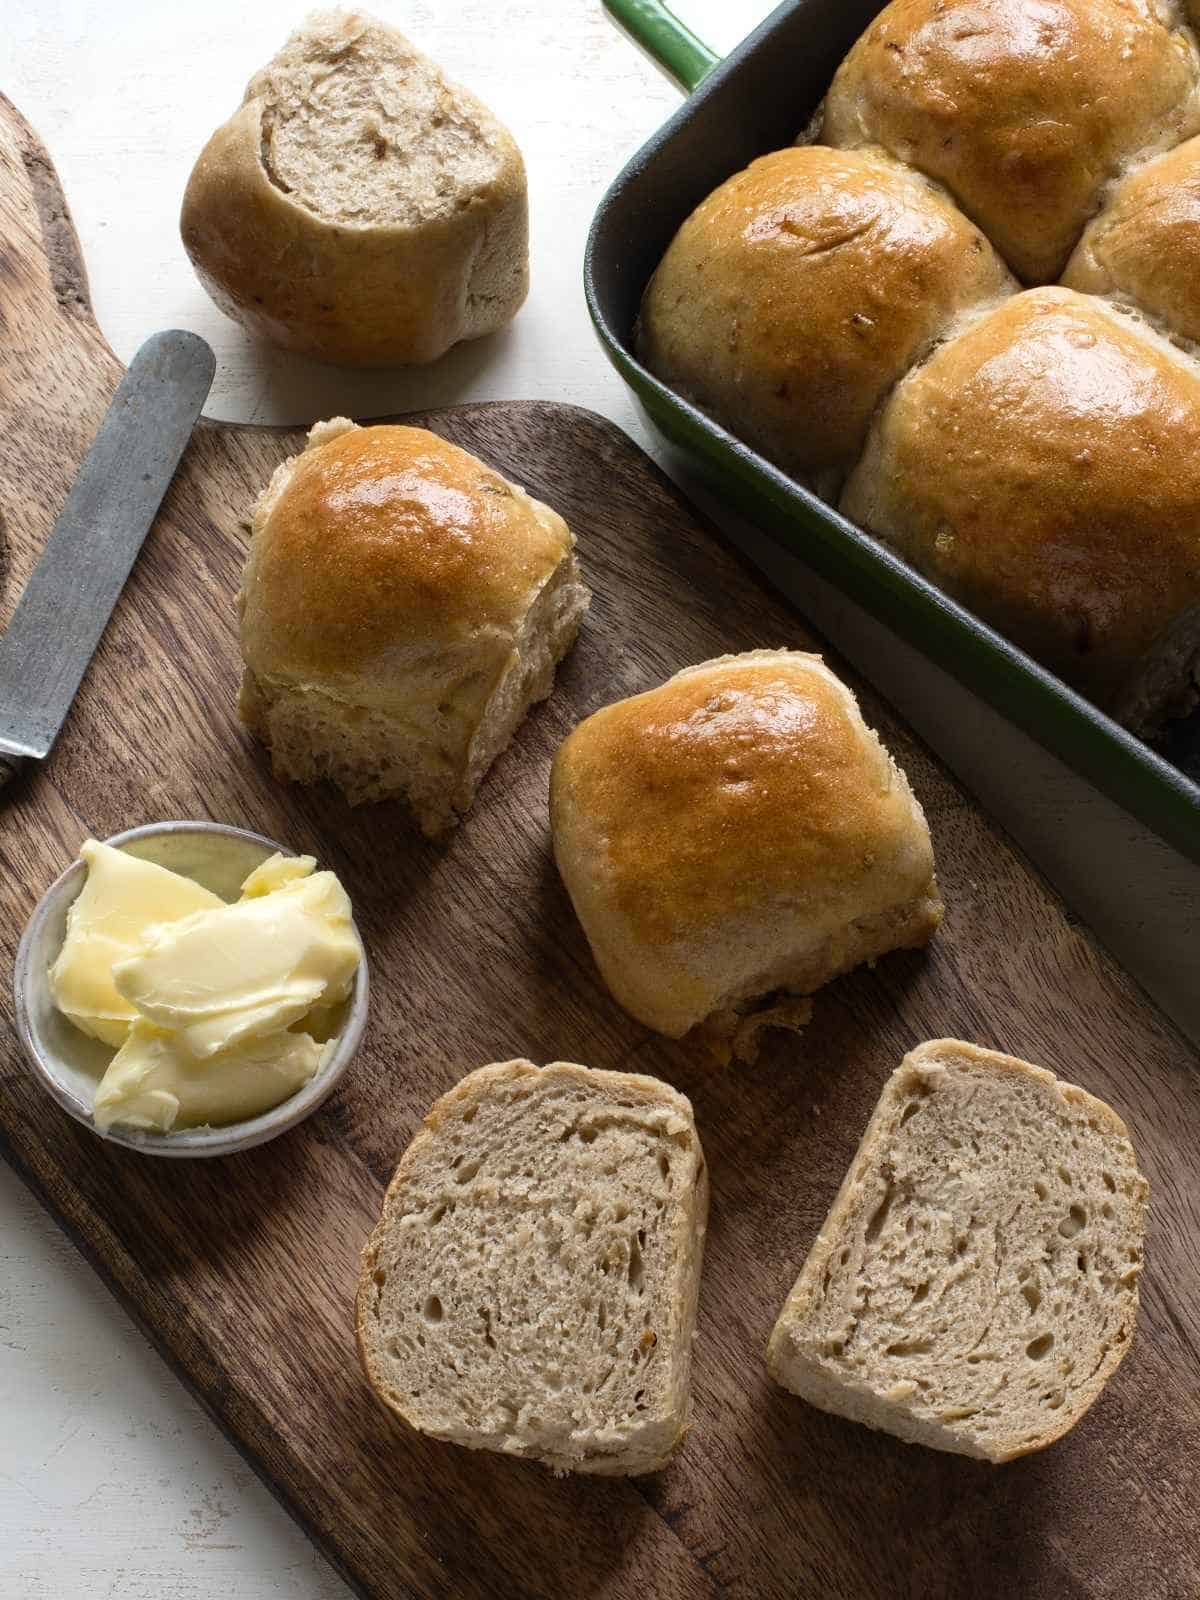 Baked onion bread rolls, one of them cut in two halfes. On a brown wooden board, with a small bowl of butter.